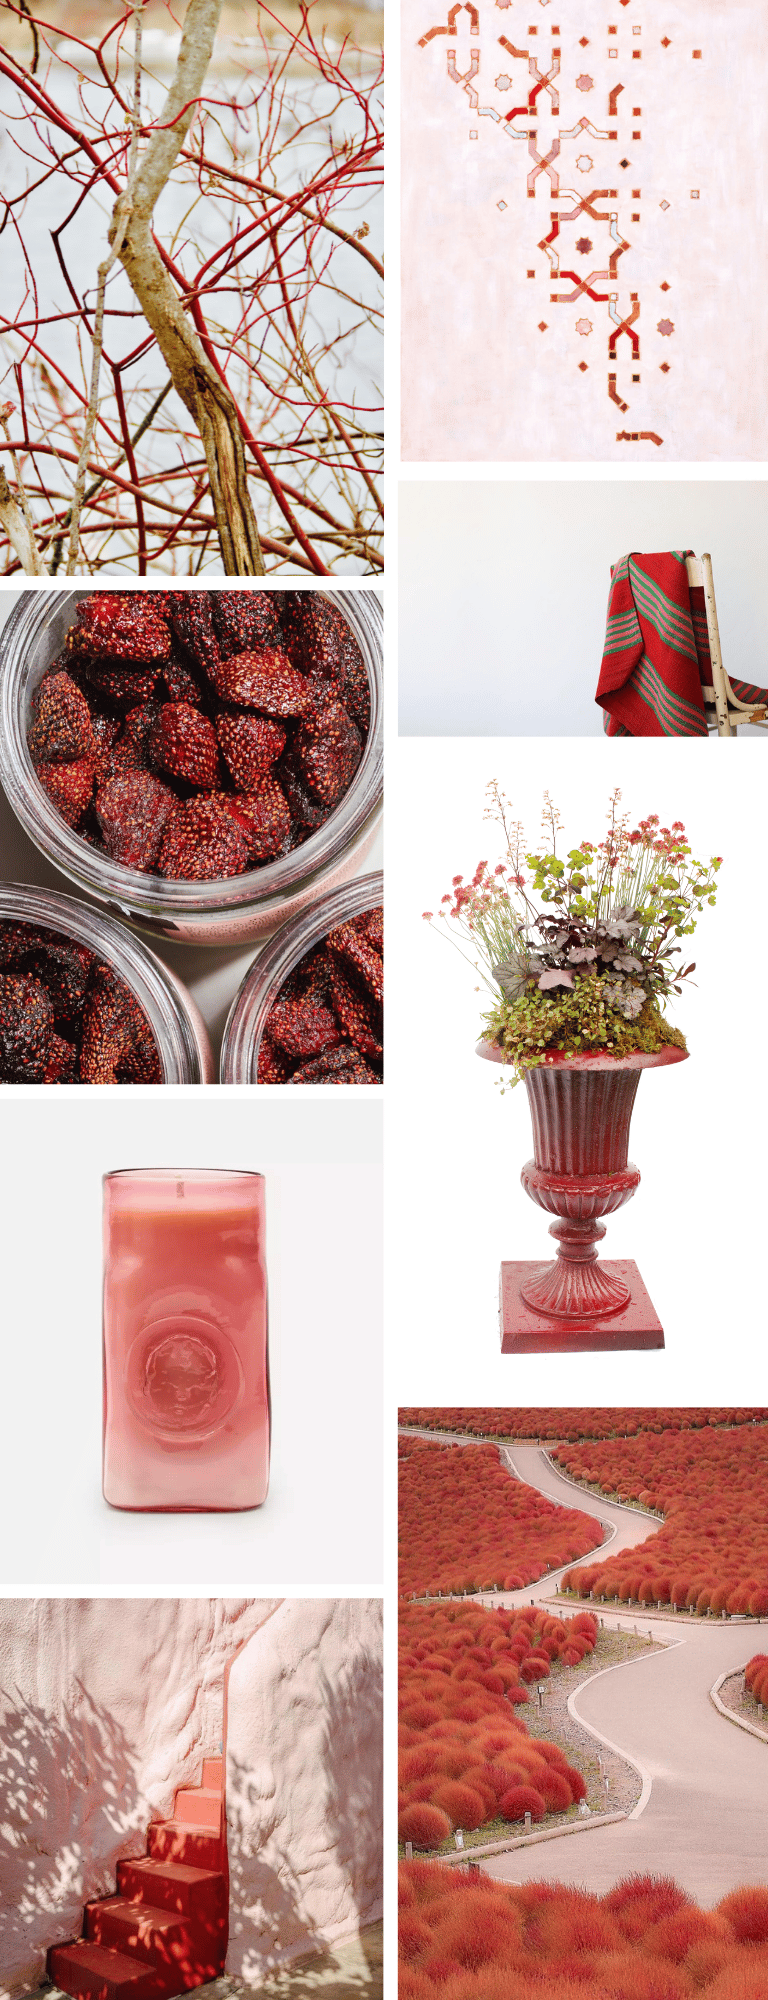 A vibrant collage of red plants and flowers, perfect for a Landscape Design mood board.